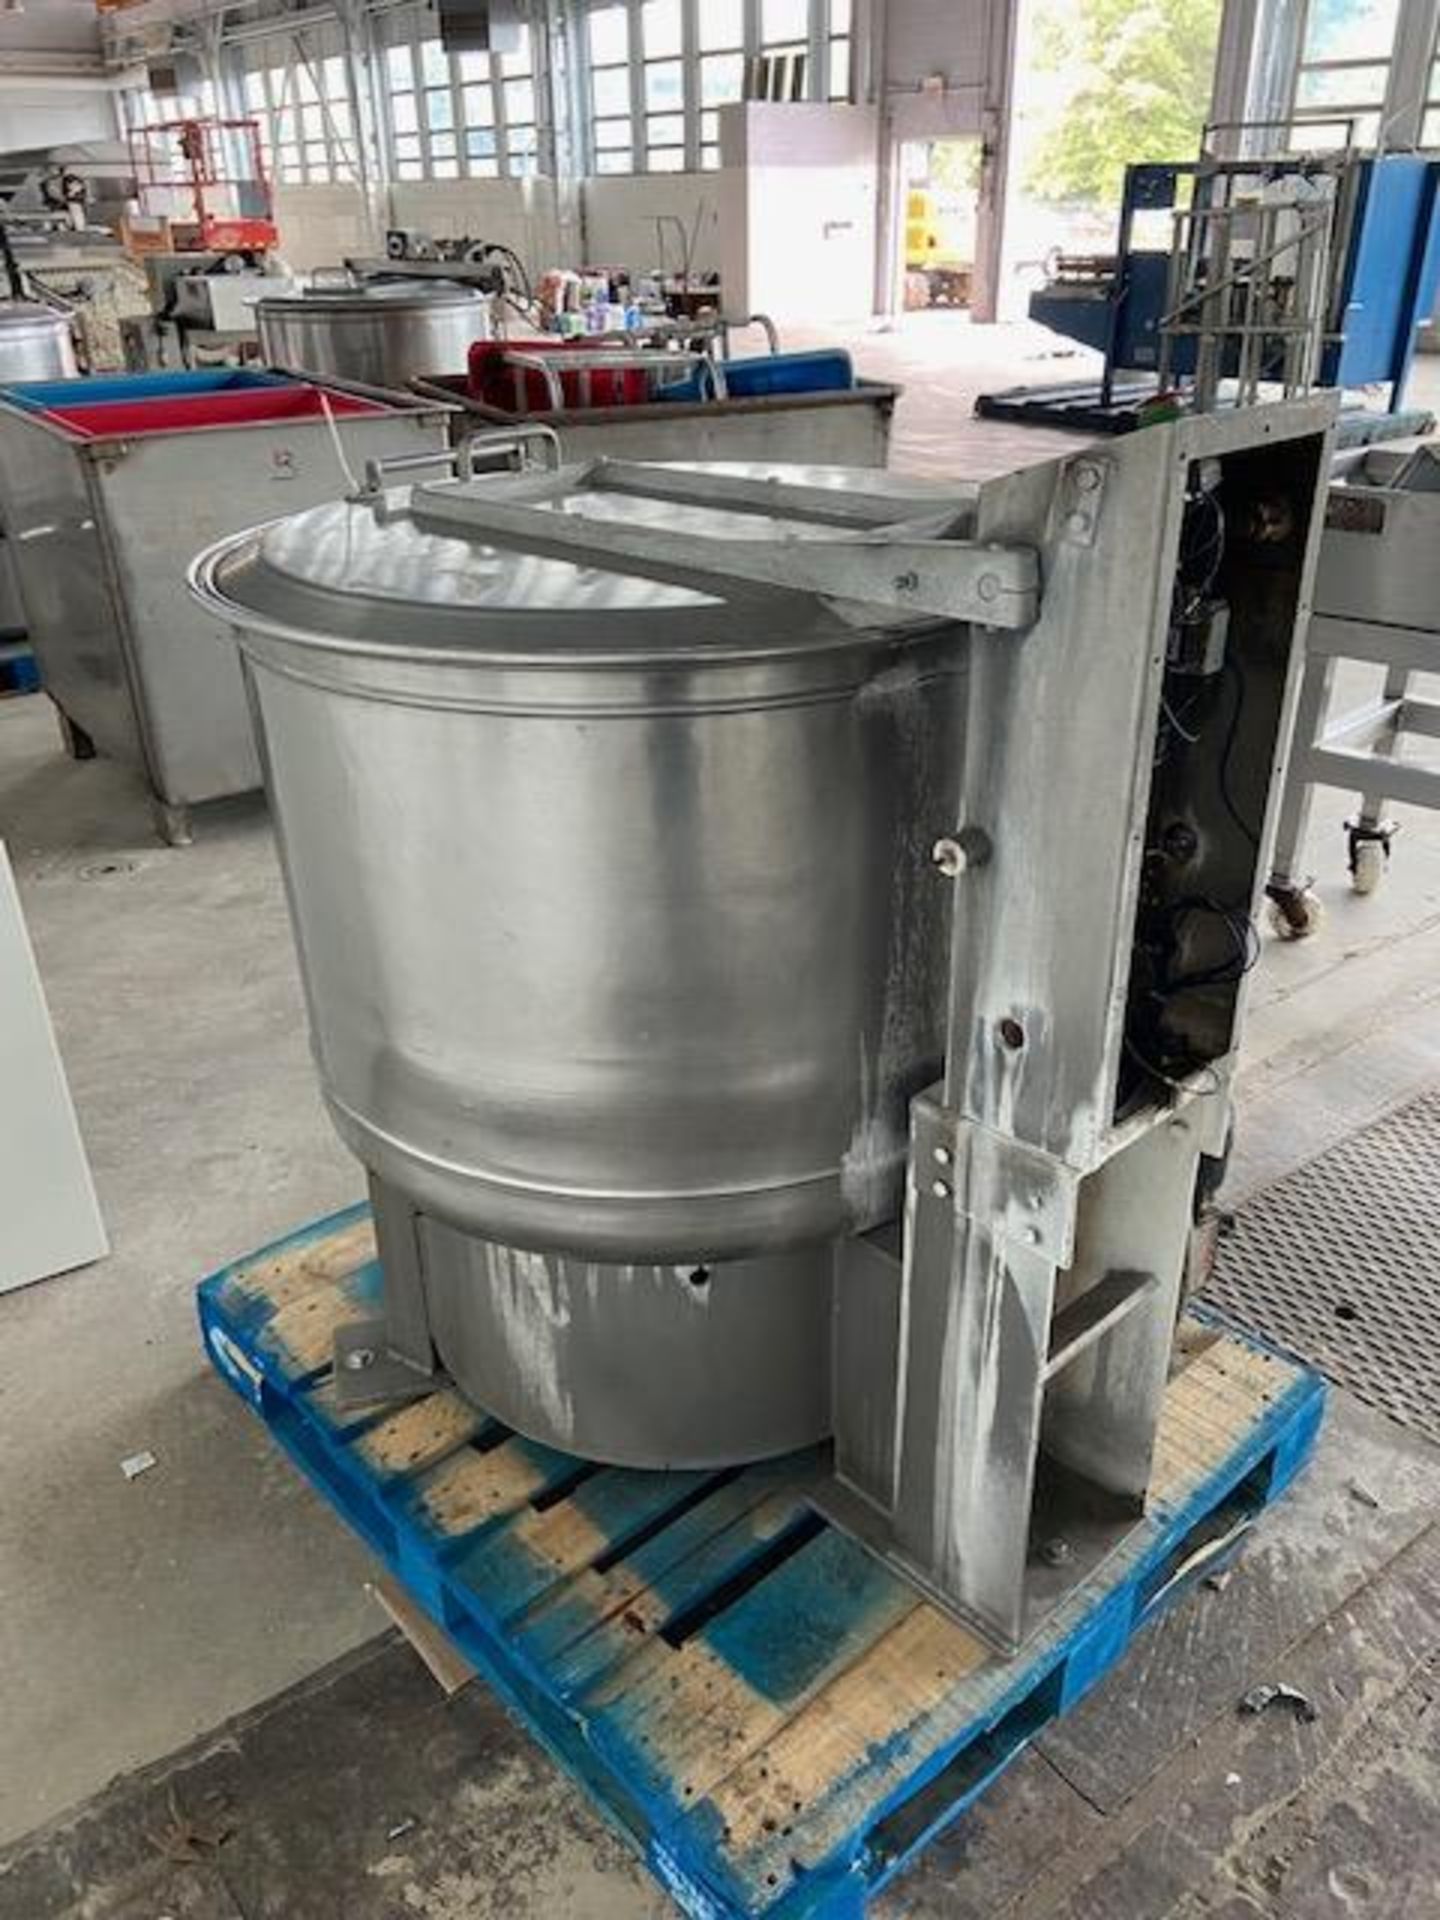 BOCK S/S CENTRIFGUAL VEGETABLESPIN DRYER(INV#80344)(Located @ the MDG Auction Showroom v2.0 - 2000 - Image 3 of 5